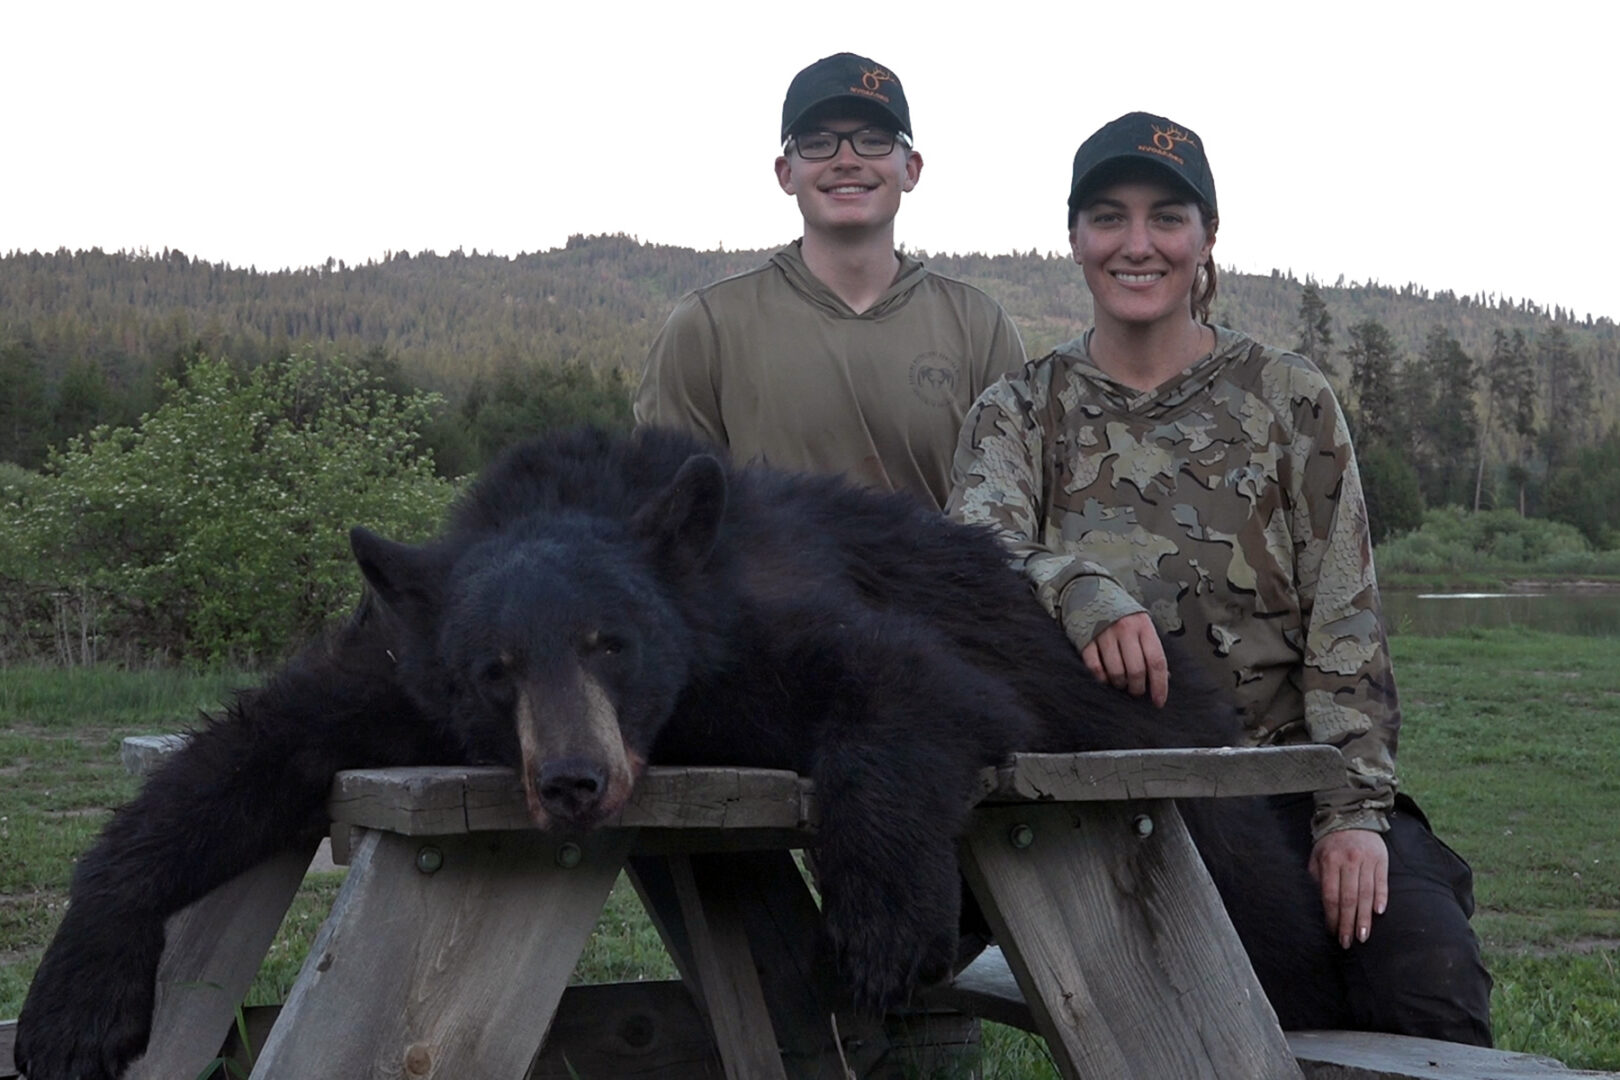 Two people posing with a black bear on top of a wooden fence.